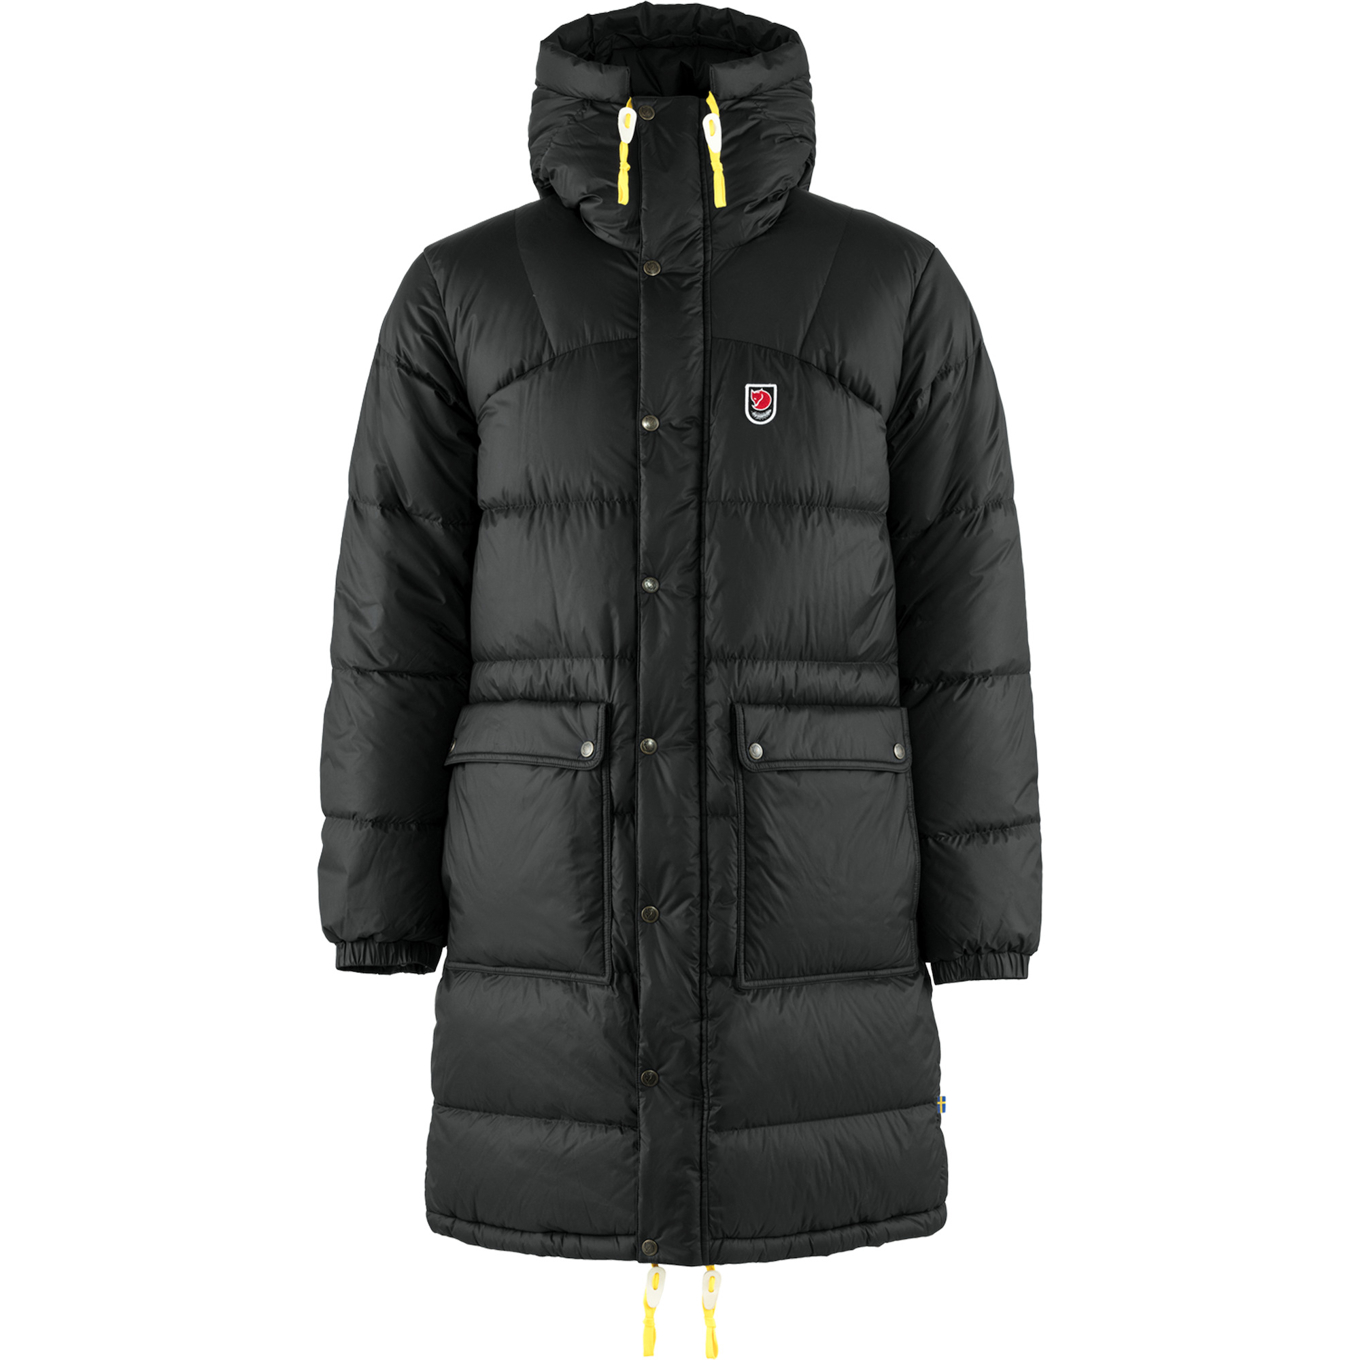 Longing for down. Fjallraven Expedition long down Parka. Fjallraven Expedition long down Parka w. Парка Fjallraven Expedition long down Parka m, размер m, 560 Navy. Fjallraven Expedition long down Parka женская Спортмарафон.